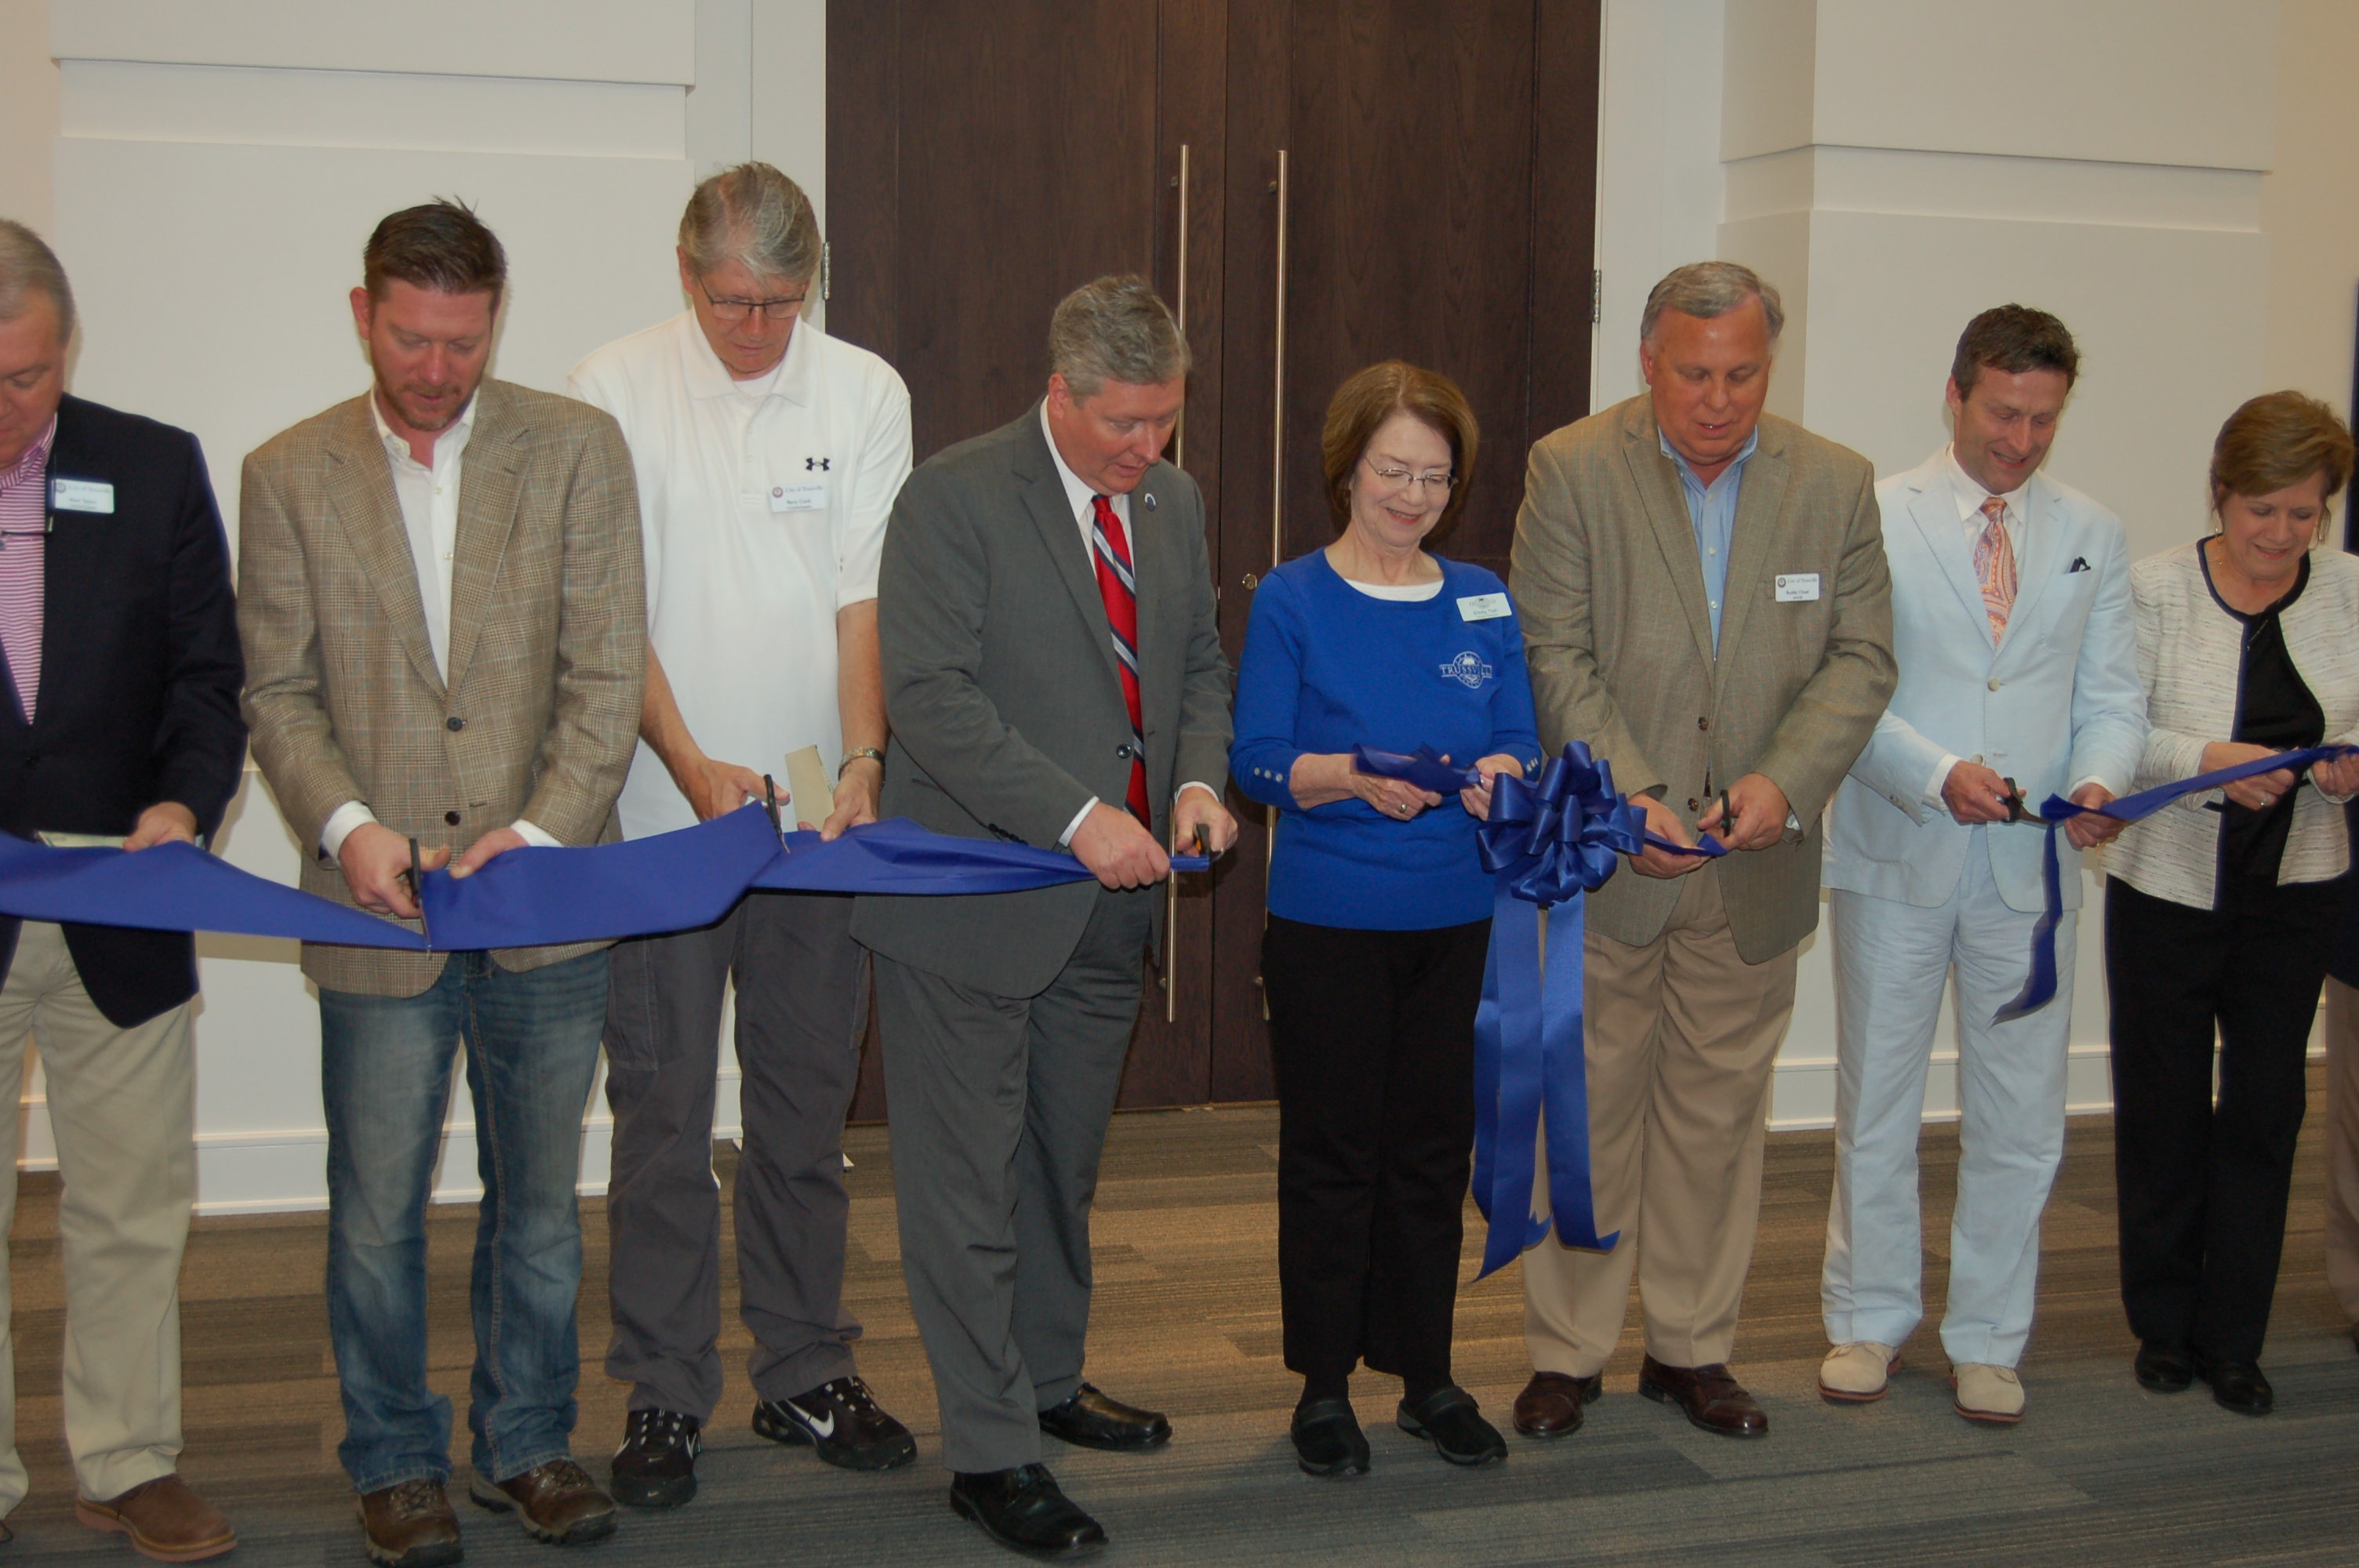 PHOTO GALLERY: Trussville Library celebrates opening day